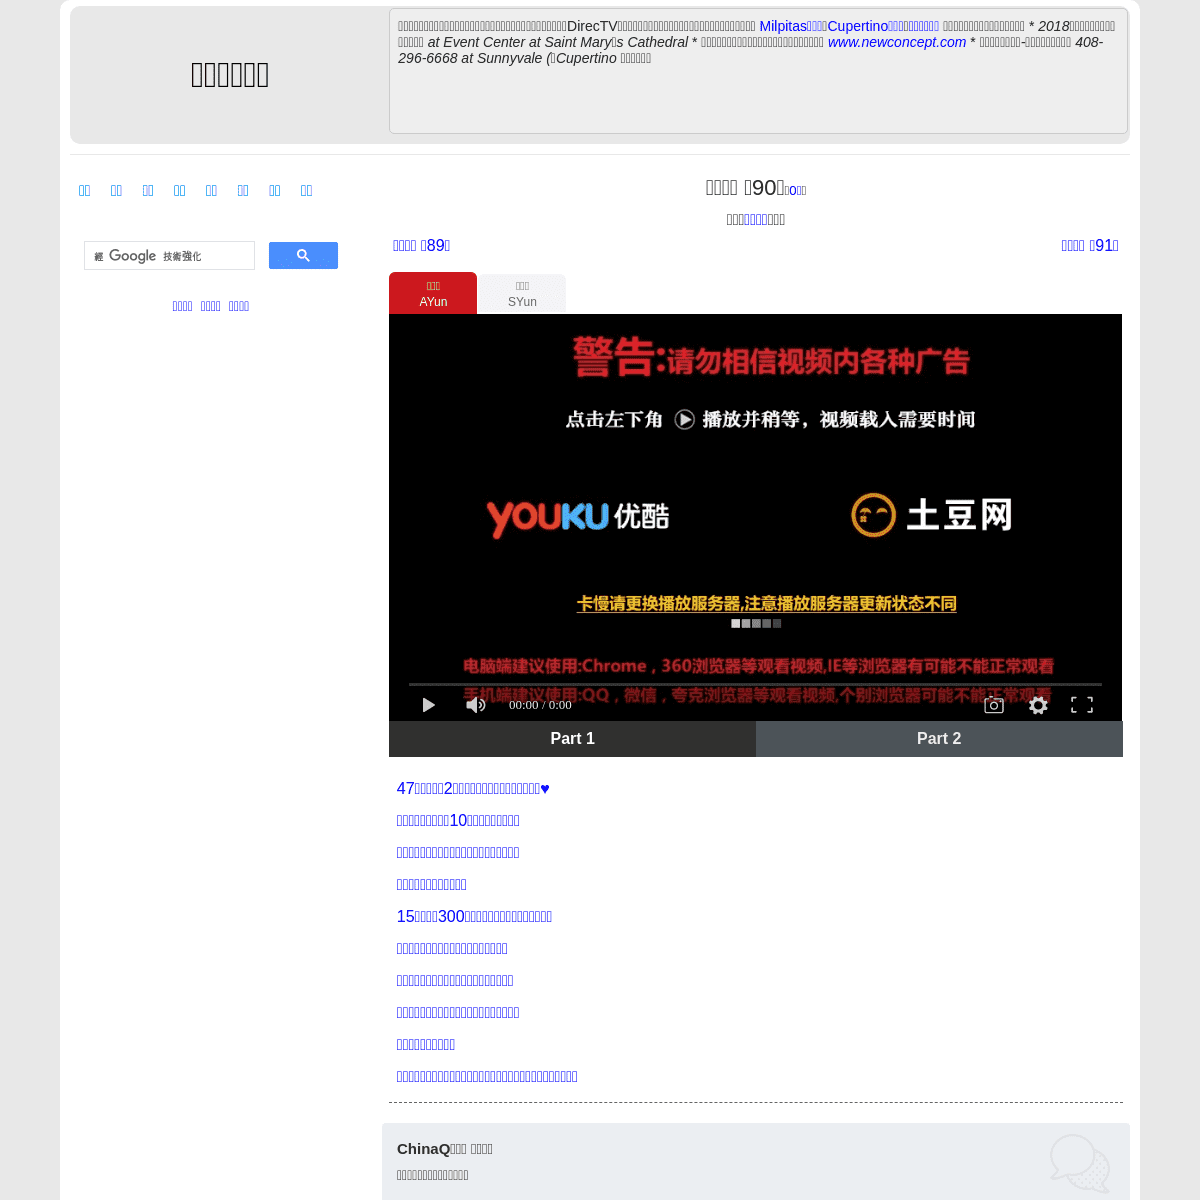 A complete backup of https://chinaq.tv/cn191217/90.html